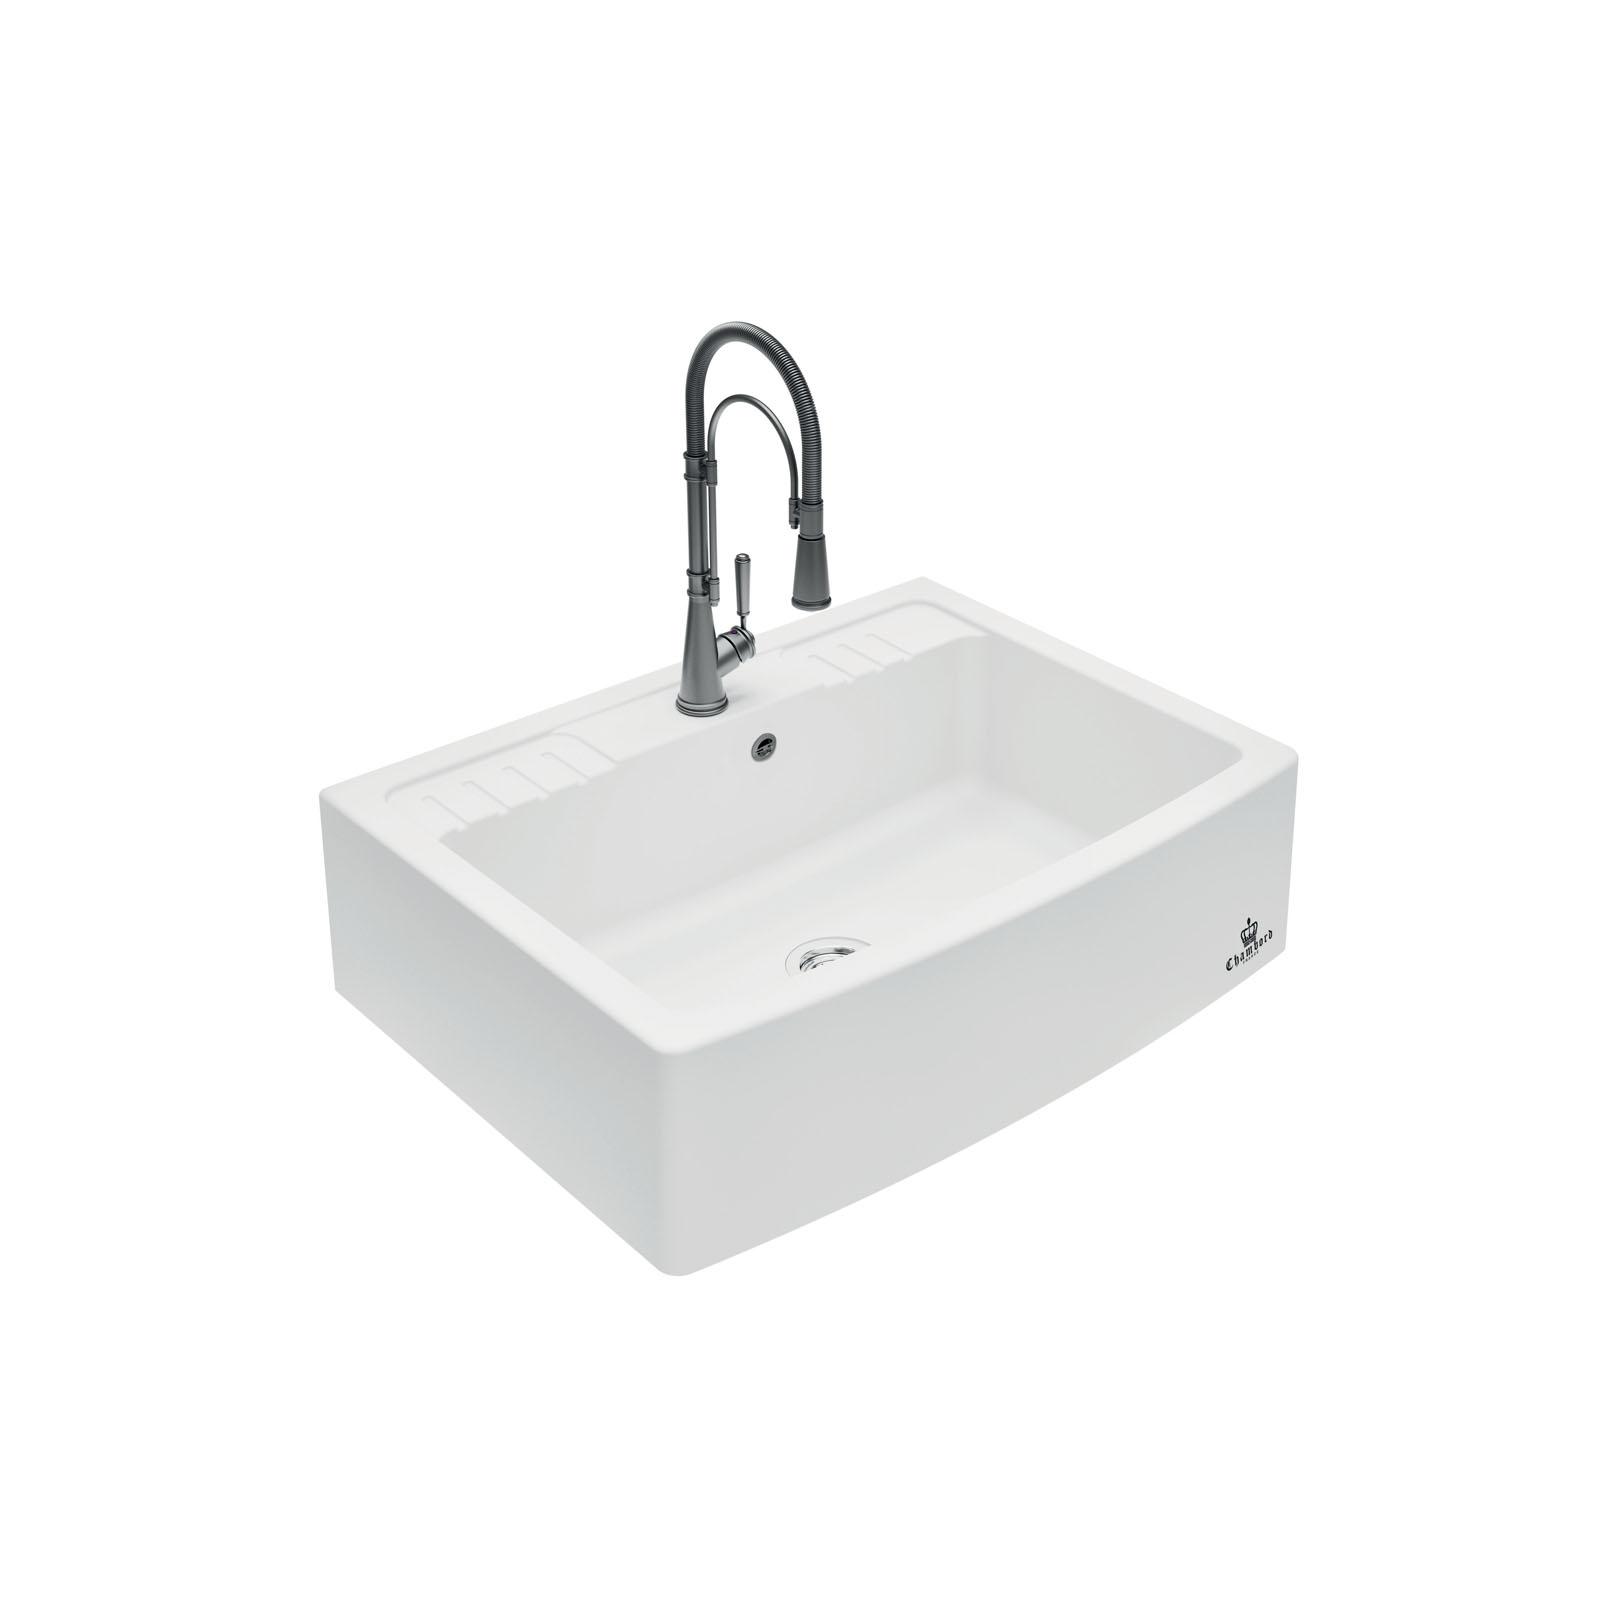 High-quality sink Clotaire IV granit white - one bowl